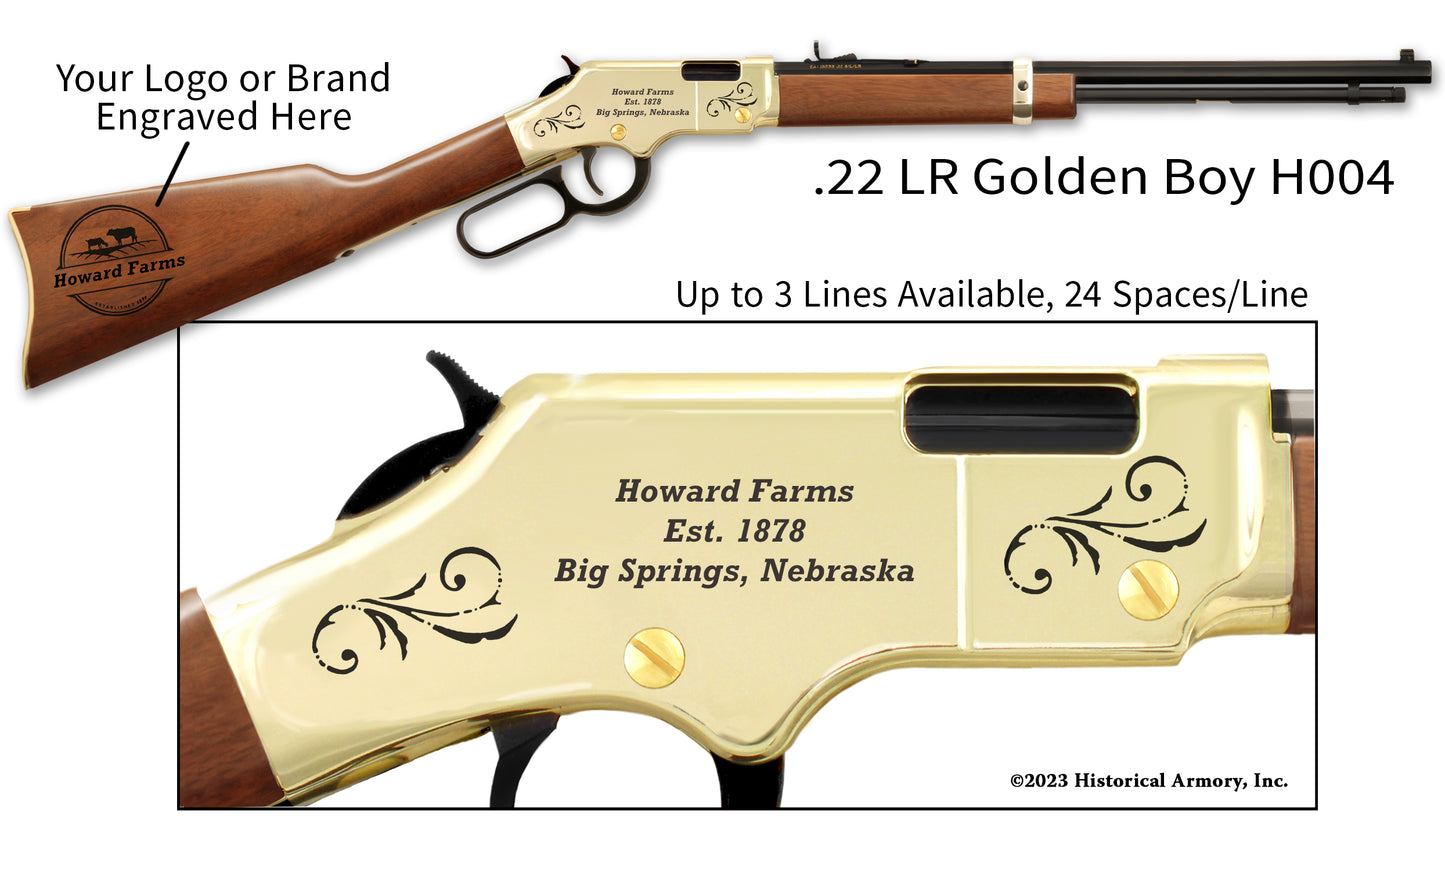 Personalized Family Farm Engraved Rifles